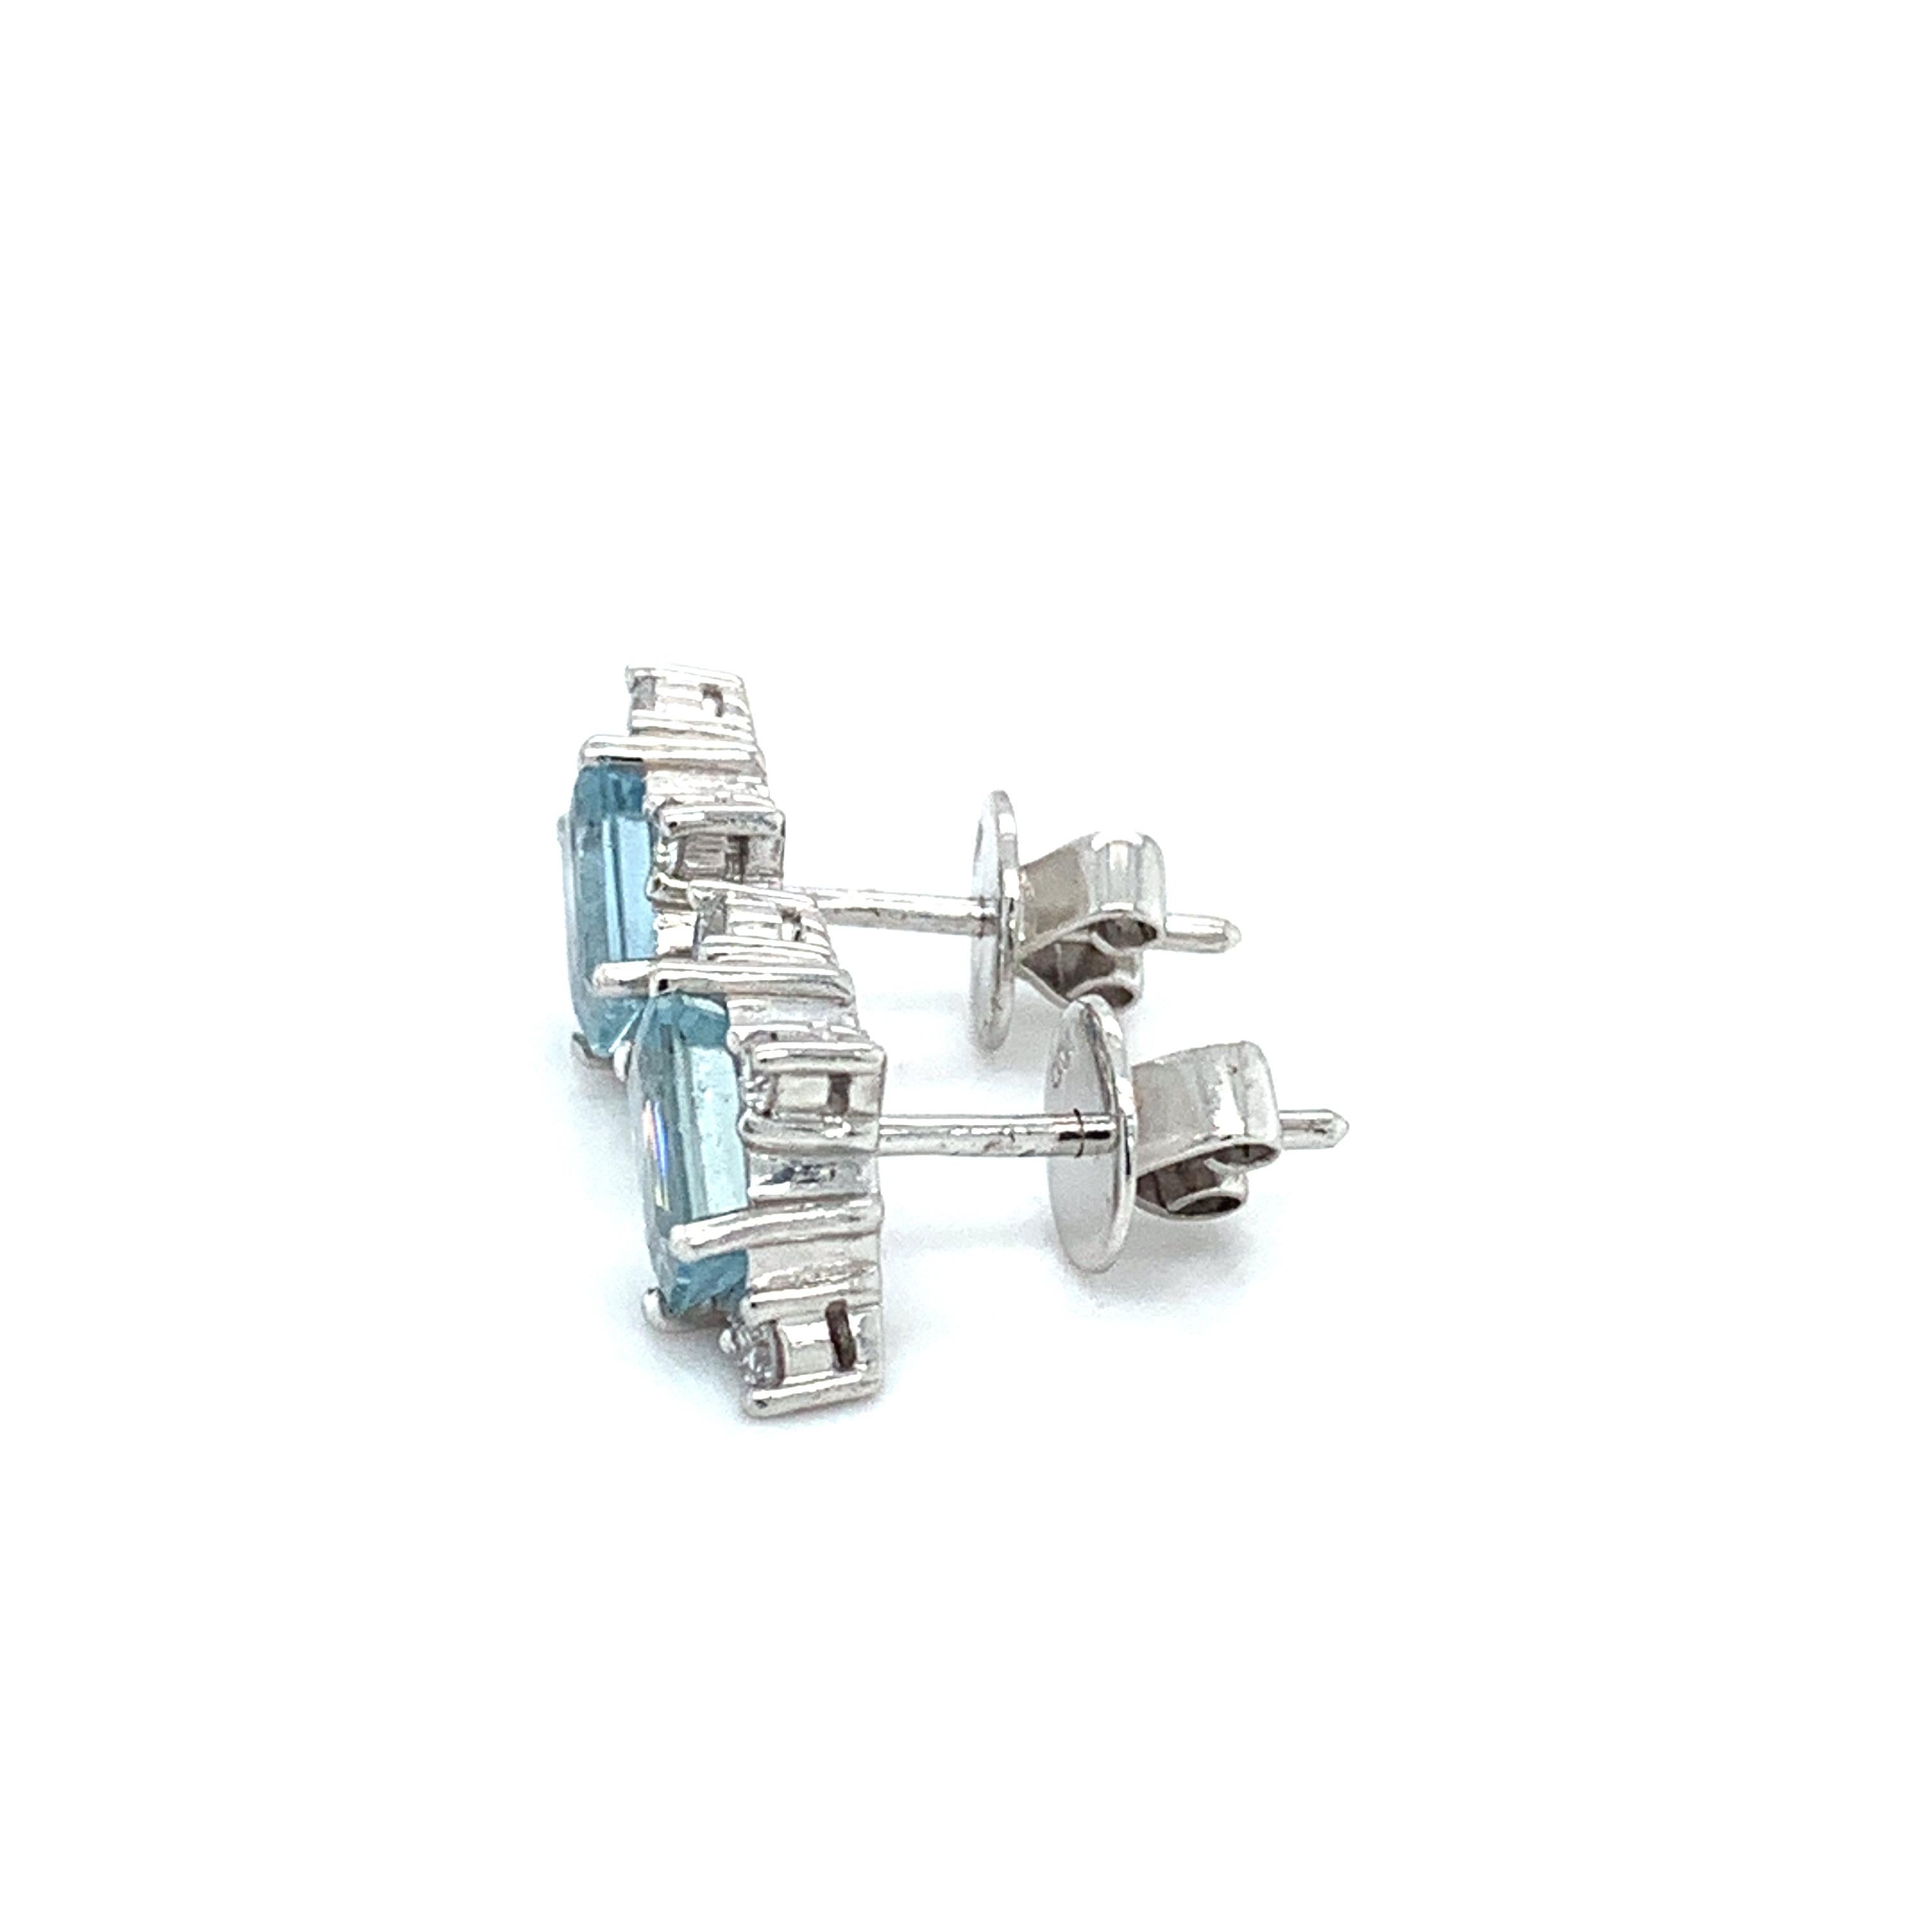 3.40ct Aquamarine diamond art deco stud earrings 18k white gold.
Composed of emerald cut aquamarine gemstone accented by round brilliant diamond in 18k white gold with butterfly settings.
Aquamarine gemstone approximately weighing 3.00 carat no